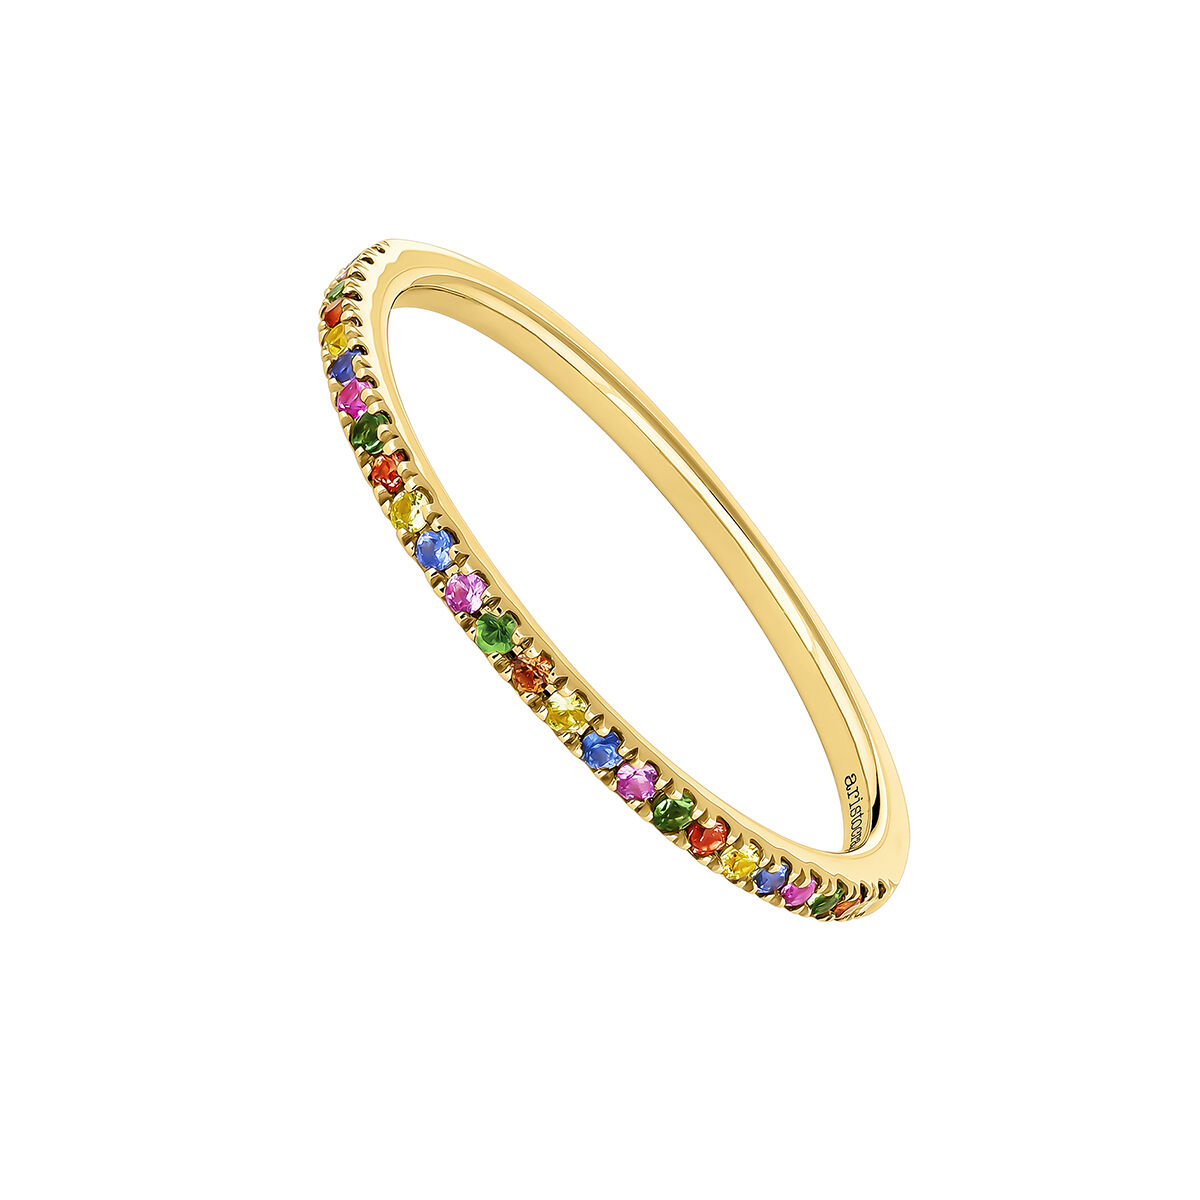 9kt yellow gold ring with multi-coloured stones, J04339-02-MULTI, hi-res